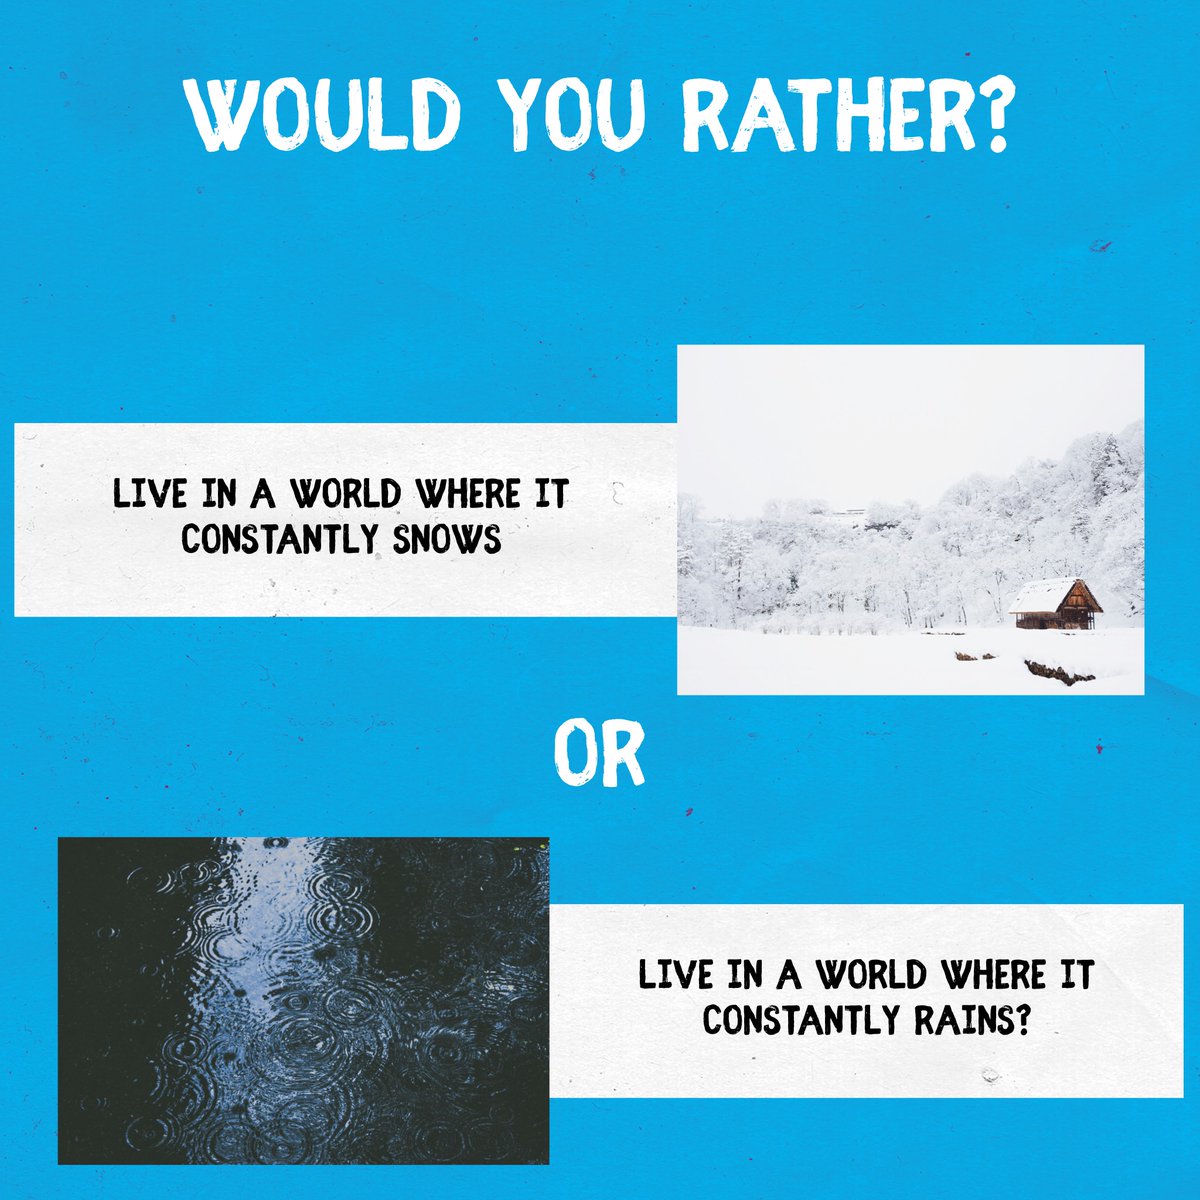 Which would you prefer? Let us know in the comments below! #acop #americanconsumeropinion #surveysformoney #wouldyourather #snow #rain